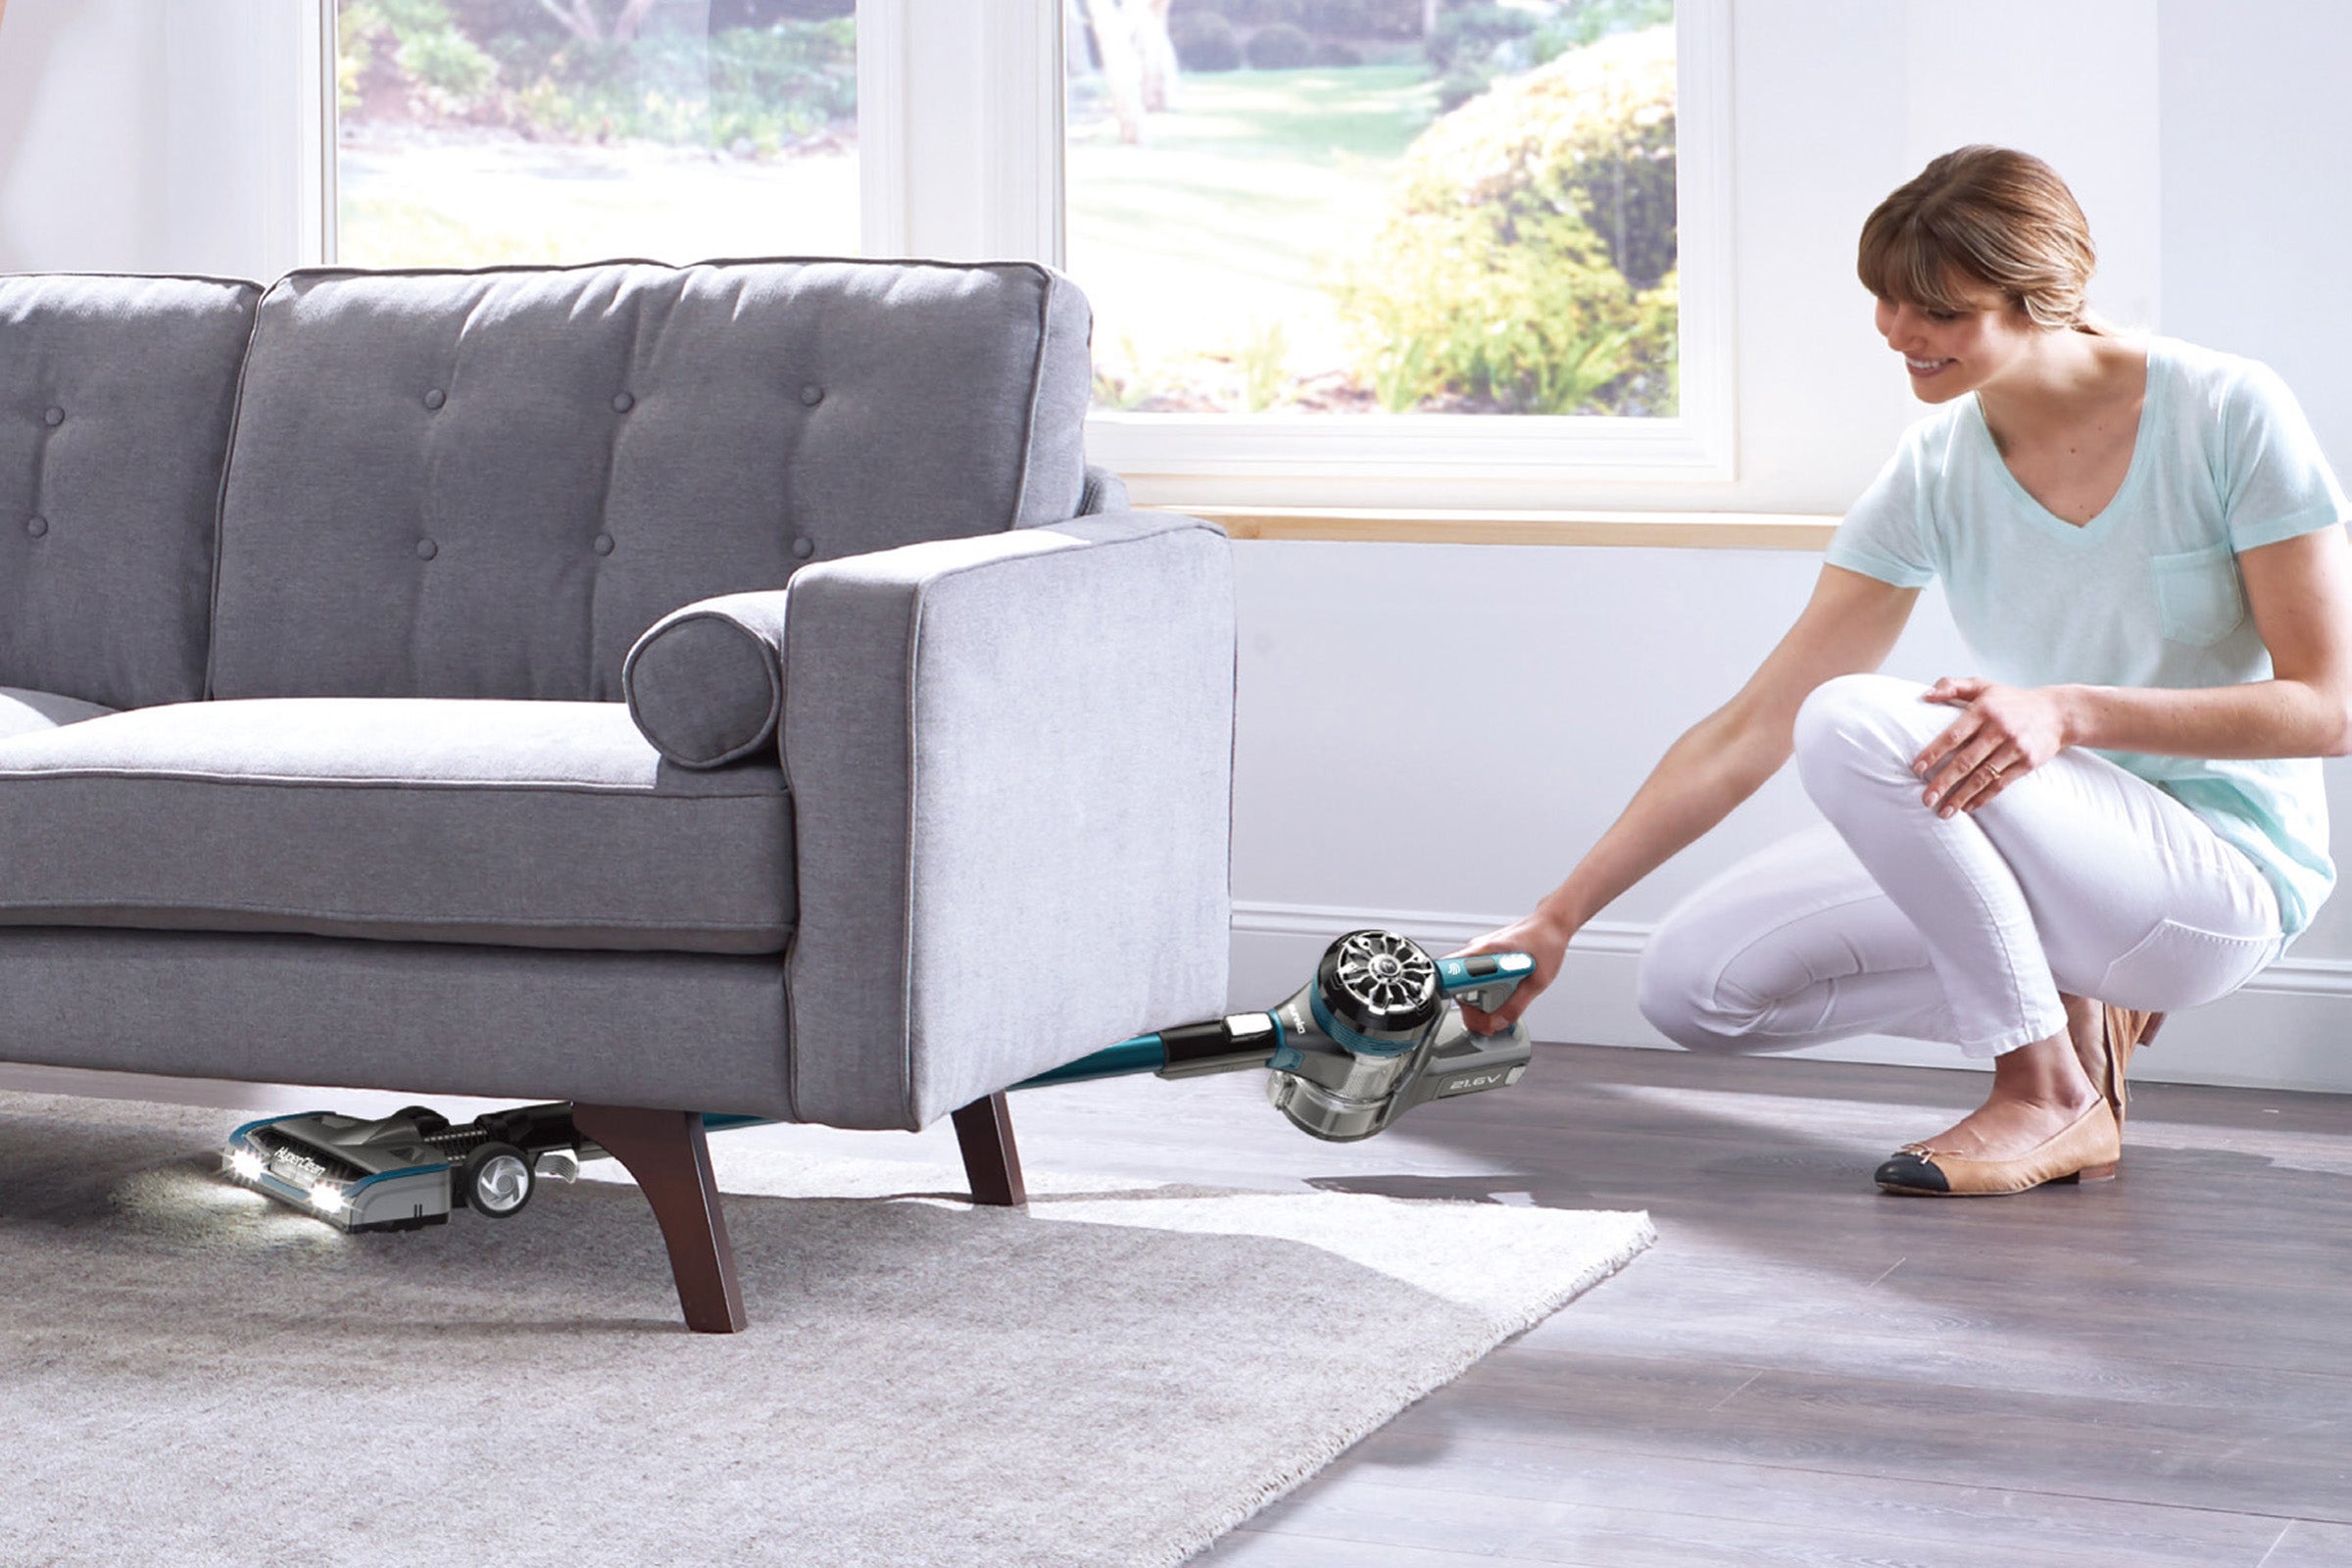 A Swan Hyperclean Eureka with vacuum cleaner held being used under a sofa on a carpet